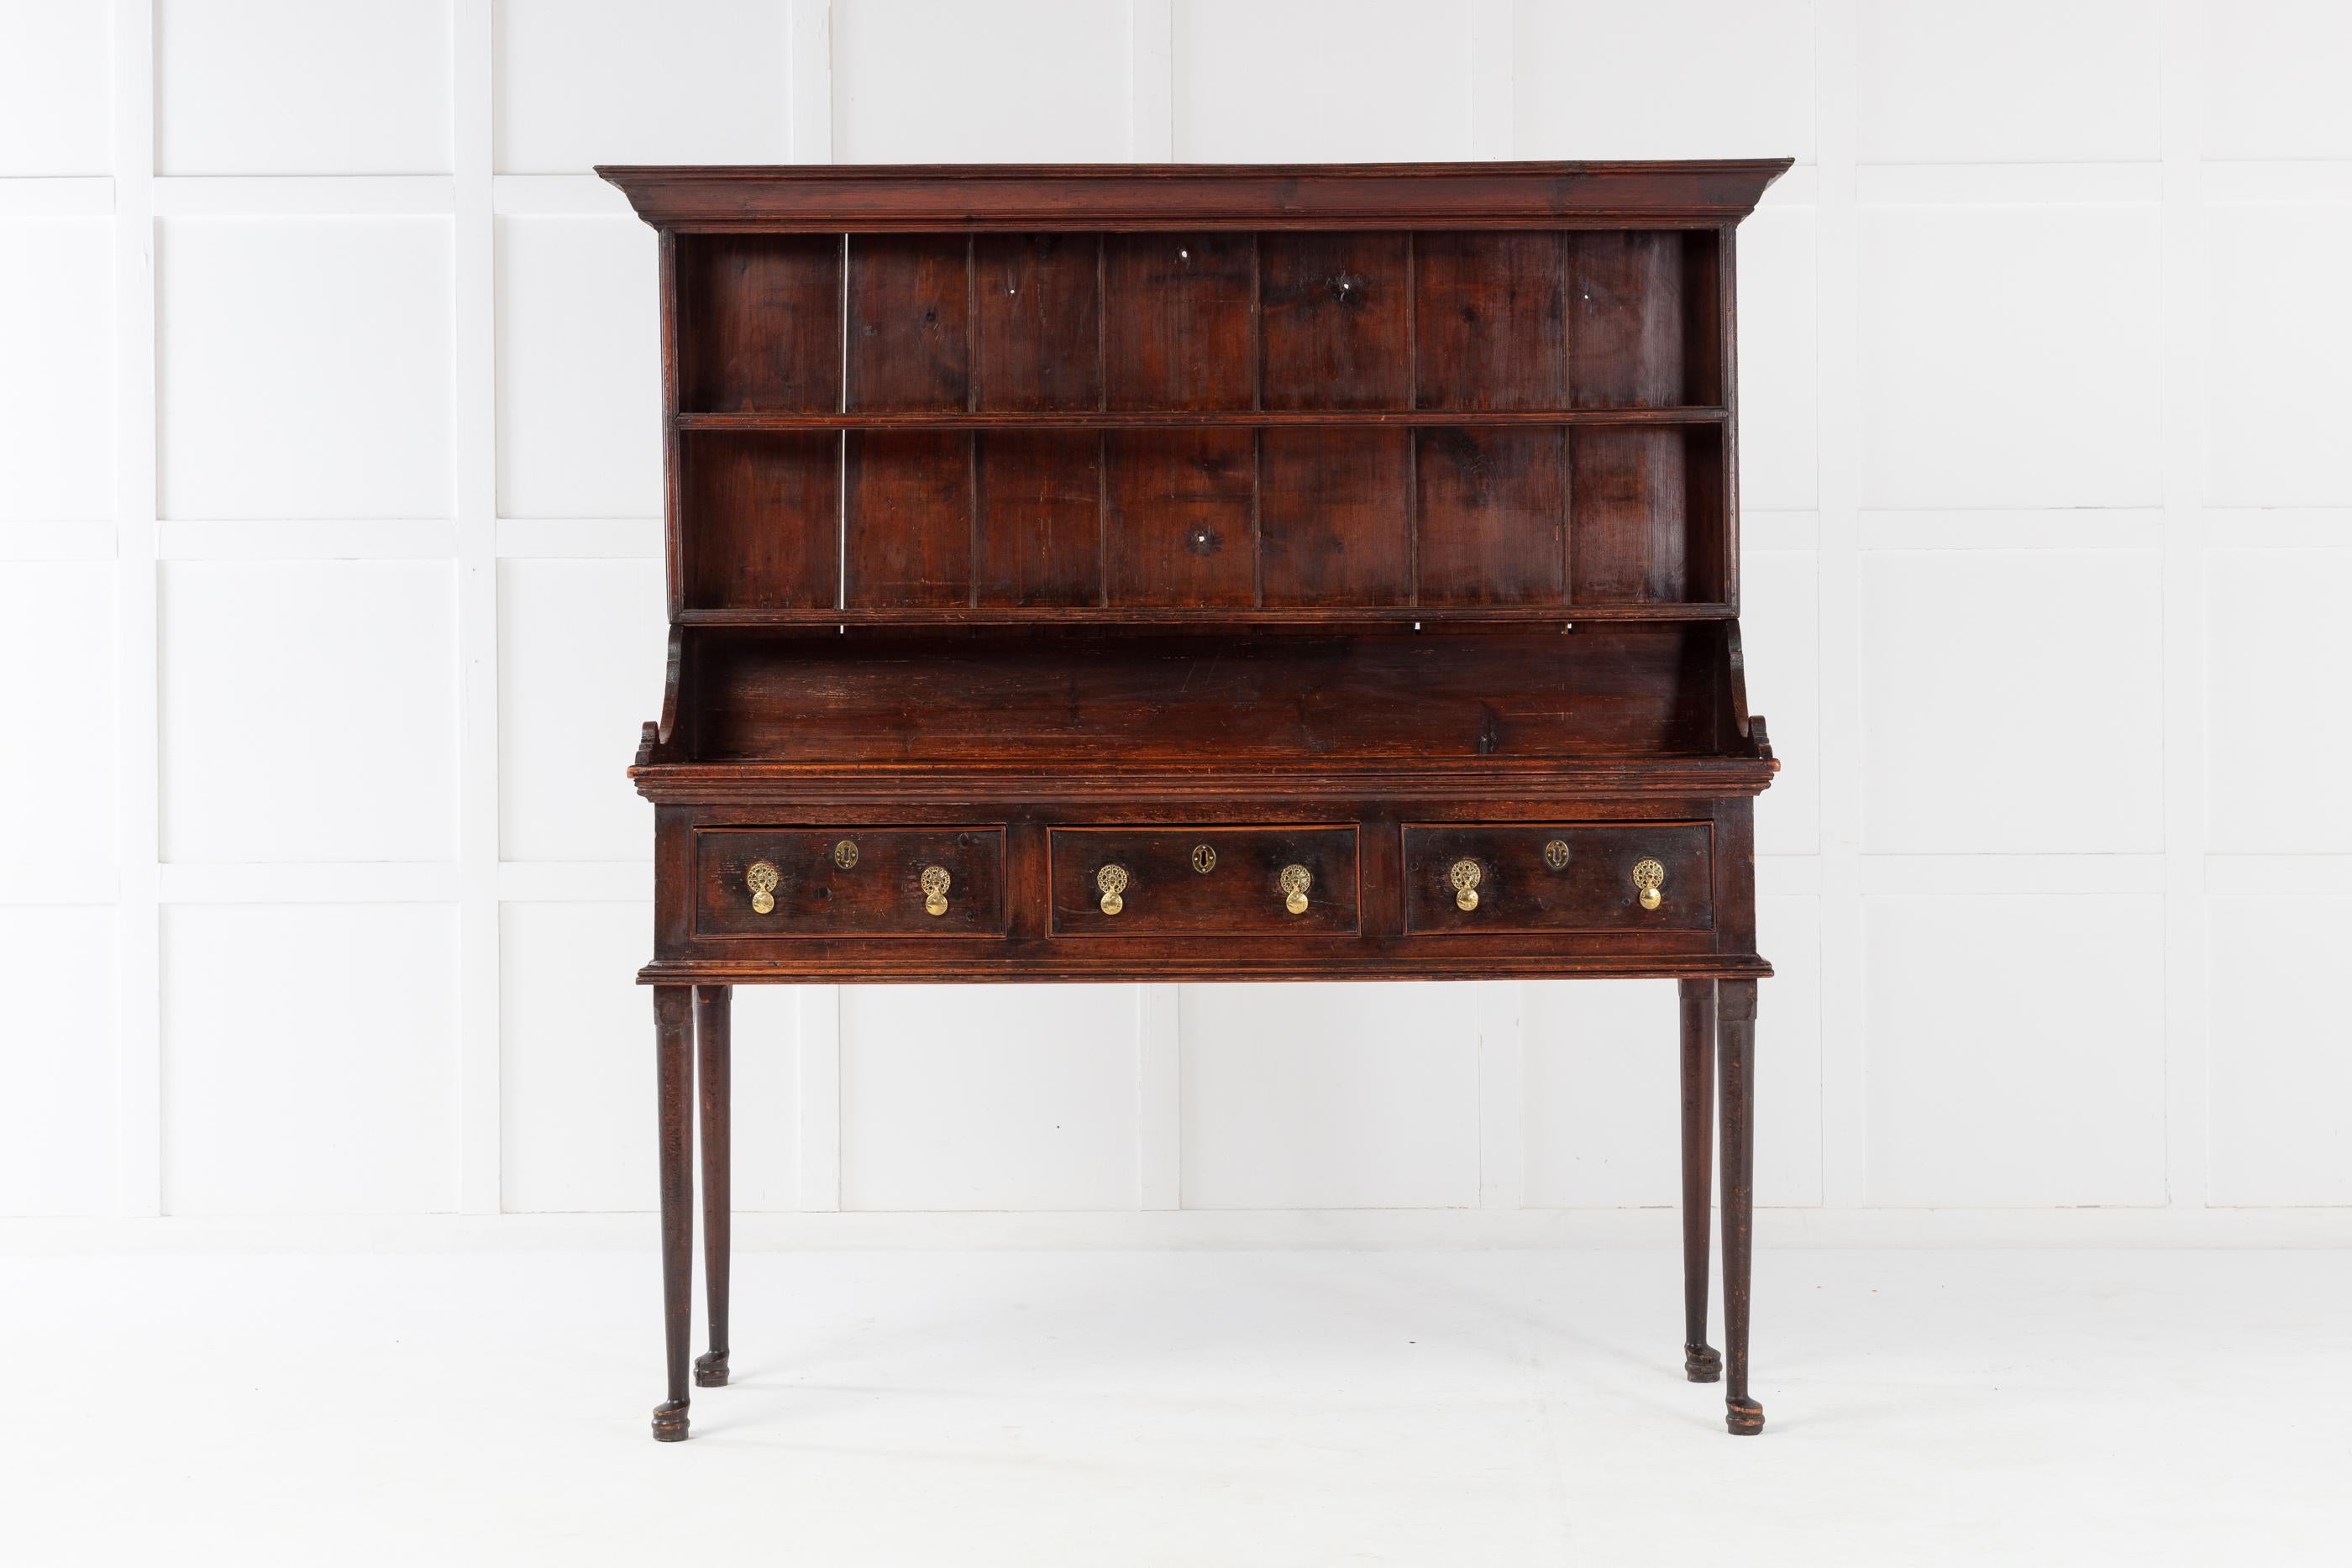 Late 18th/early 19th century pine dresser with its original rack, with moulded cornice and two plate shelves. Having three drawers. Supported by very unusual, high pad foot legs. Excellent original colour.

This is a really unusual dresser with